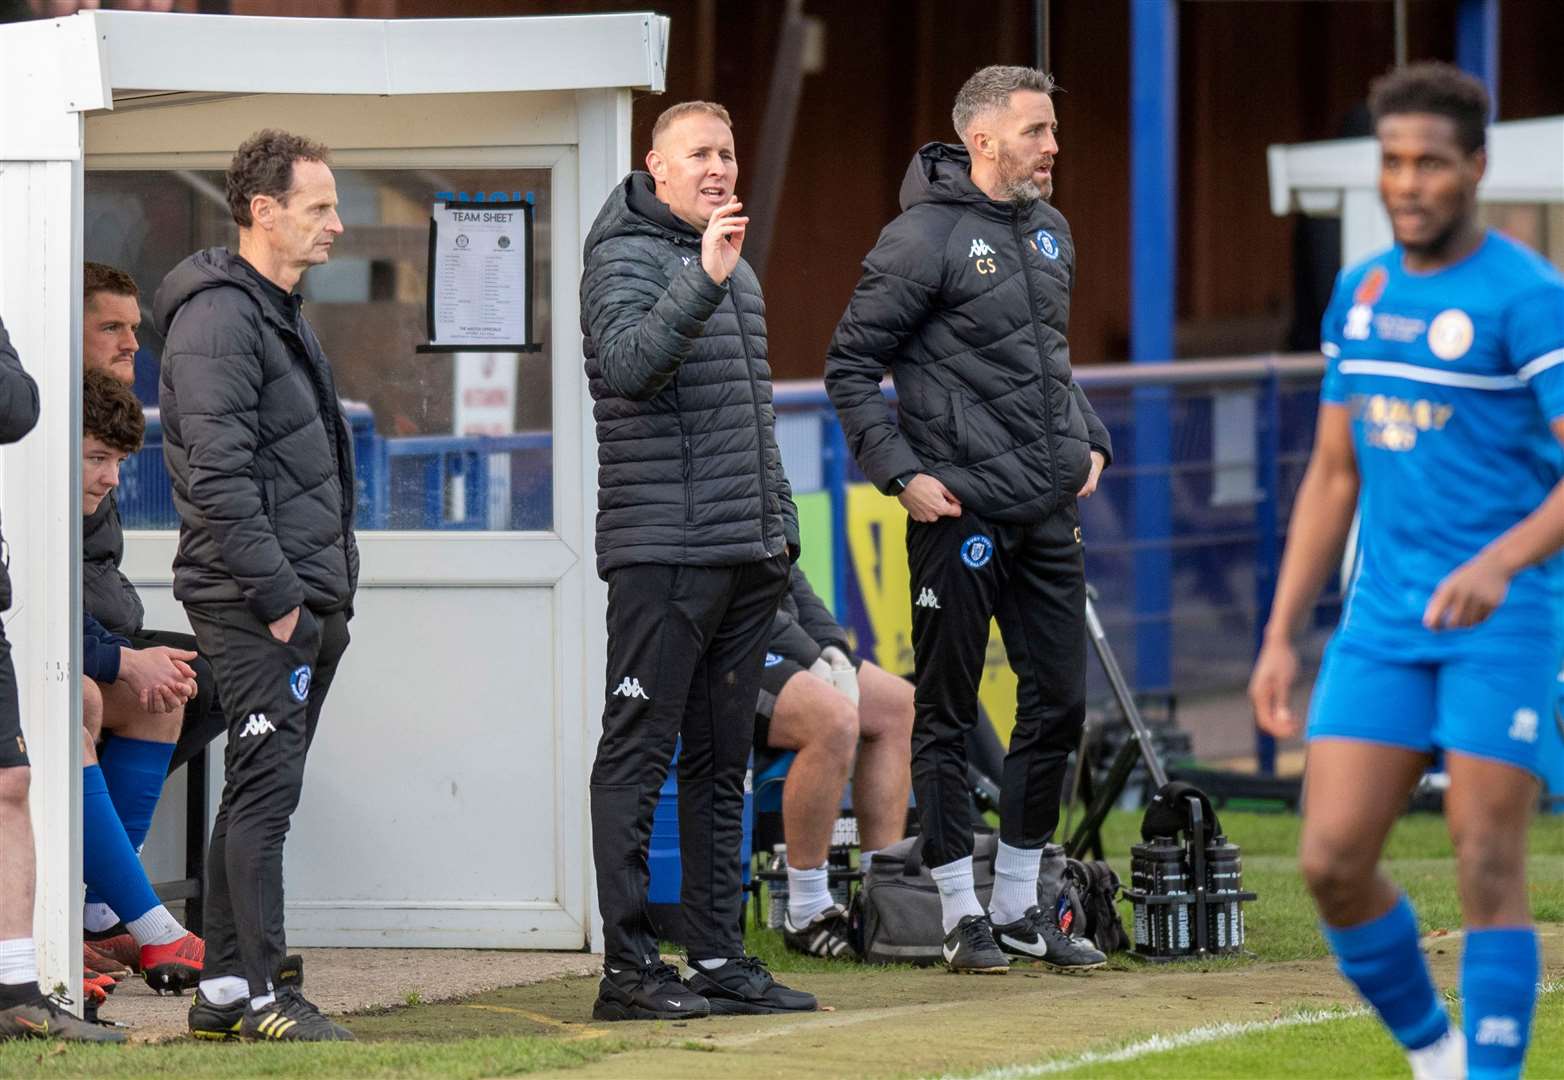 The Bury Town management team of Mark Jolland (left), Cole Skuse (centre) and Paul Musgrove (right) on the touchline Picture: Mark Westley